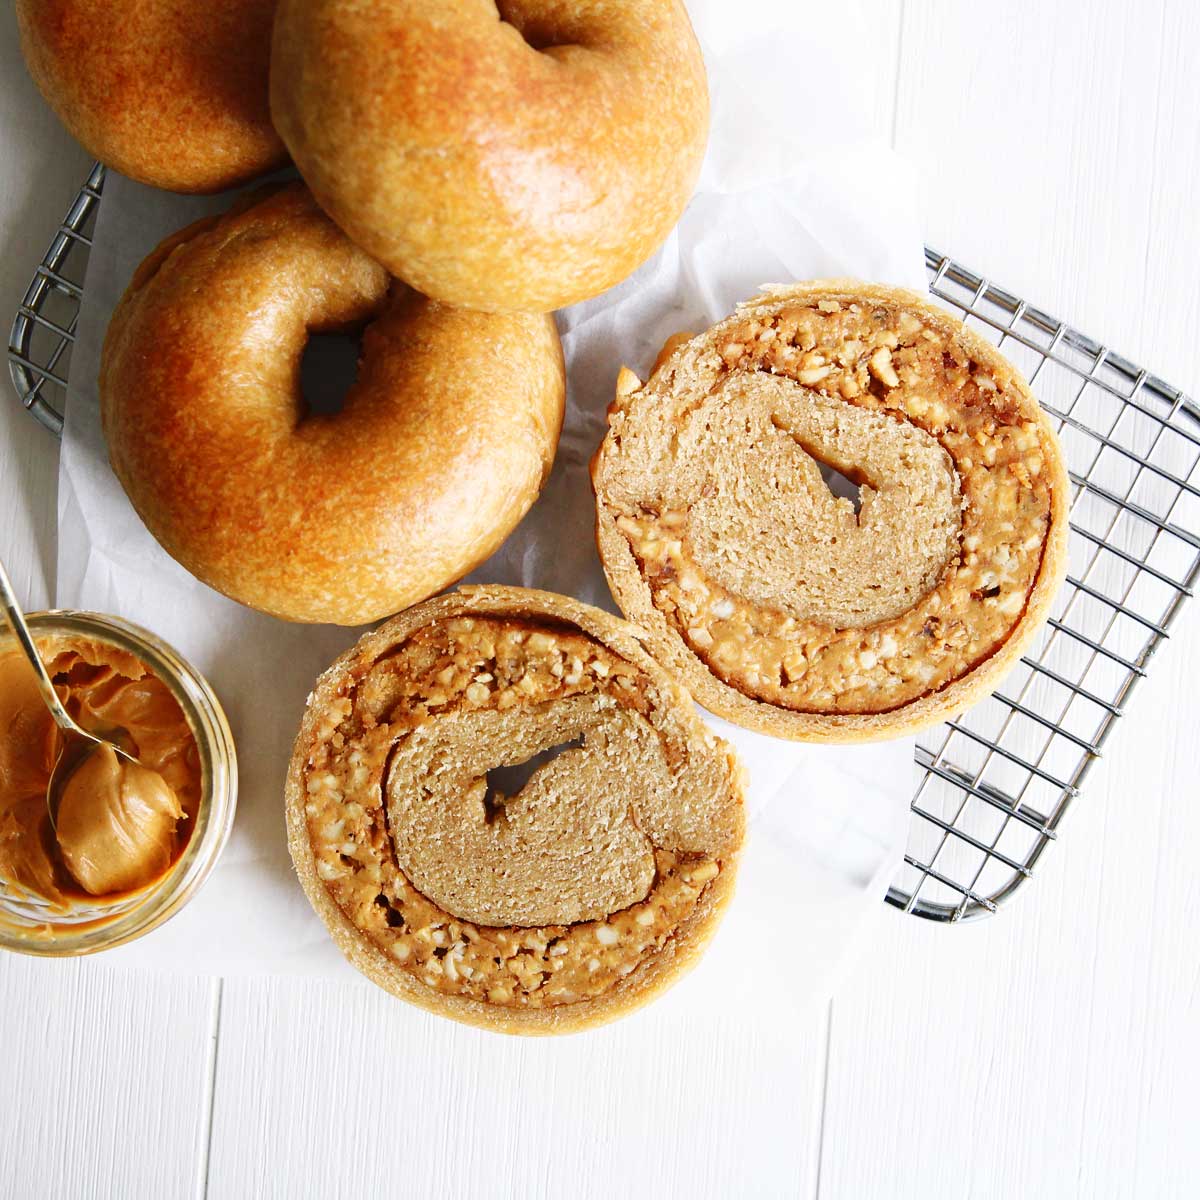 I Stuffed a Bagel With Peanut Butter! High Protein PB Stuffed Bagels Recipe - how to stuff bagels